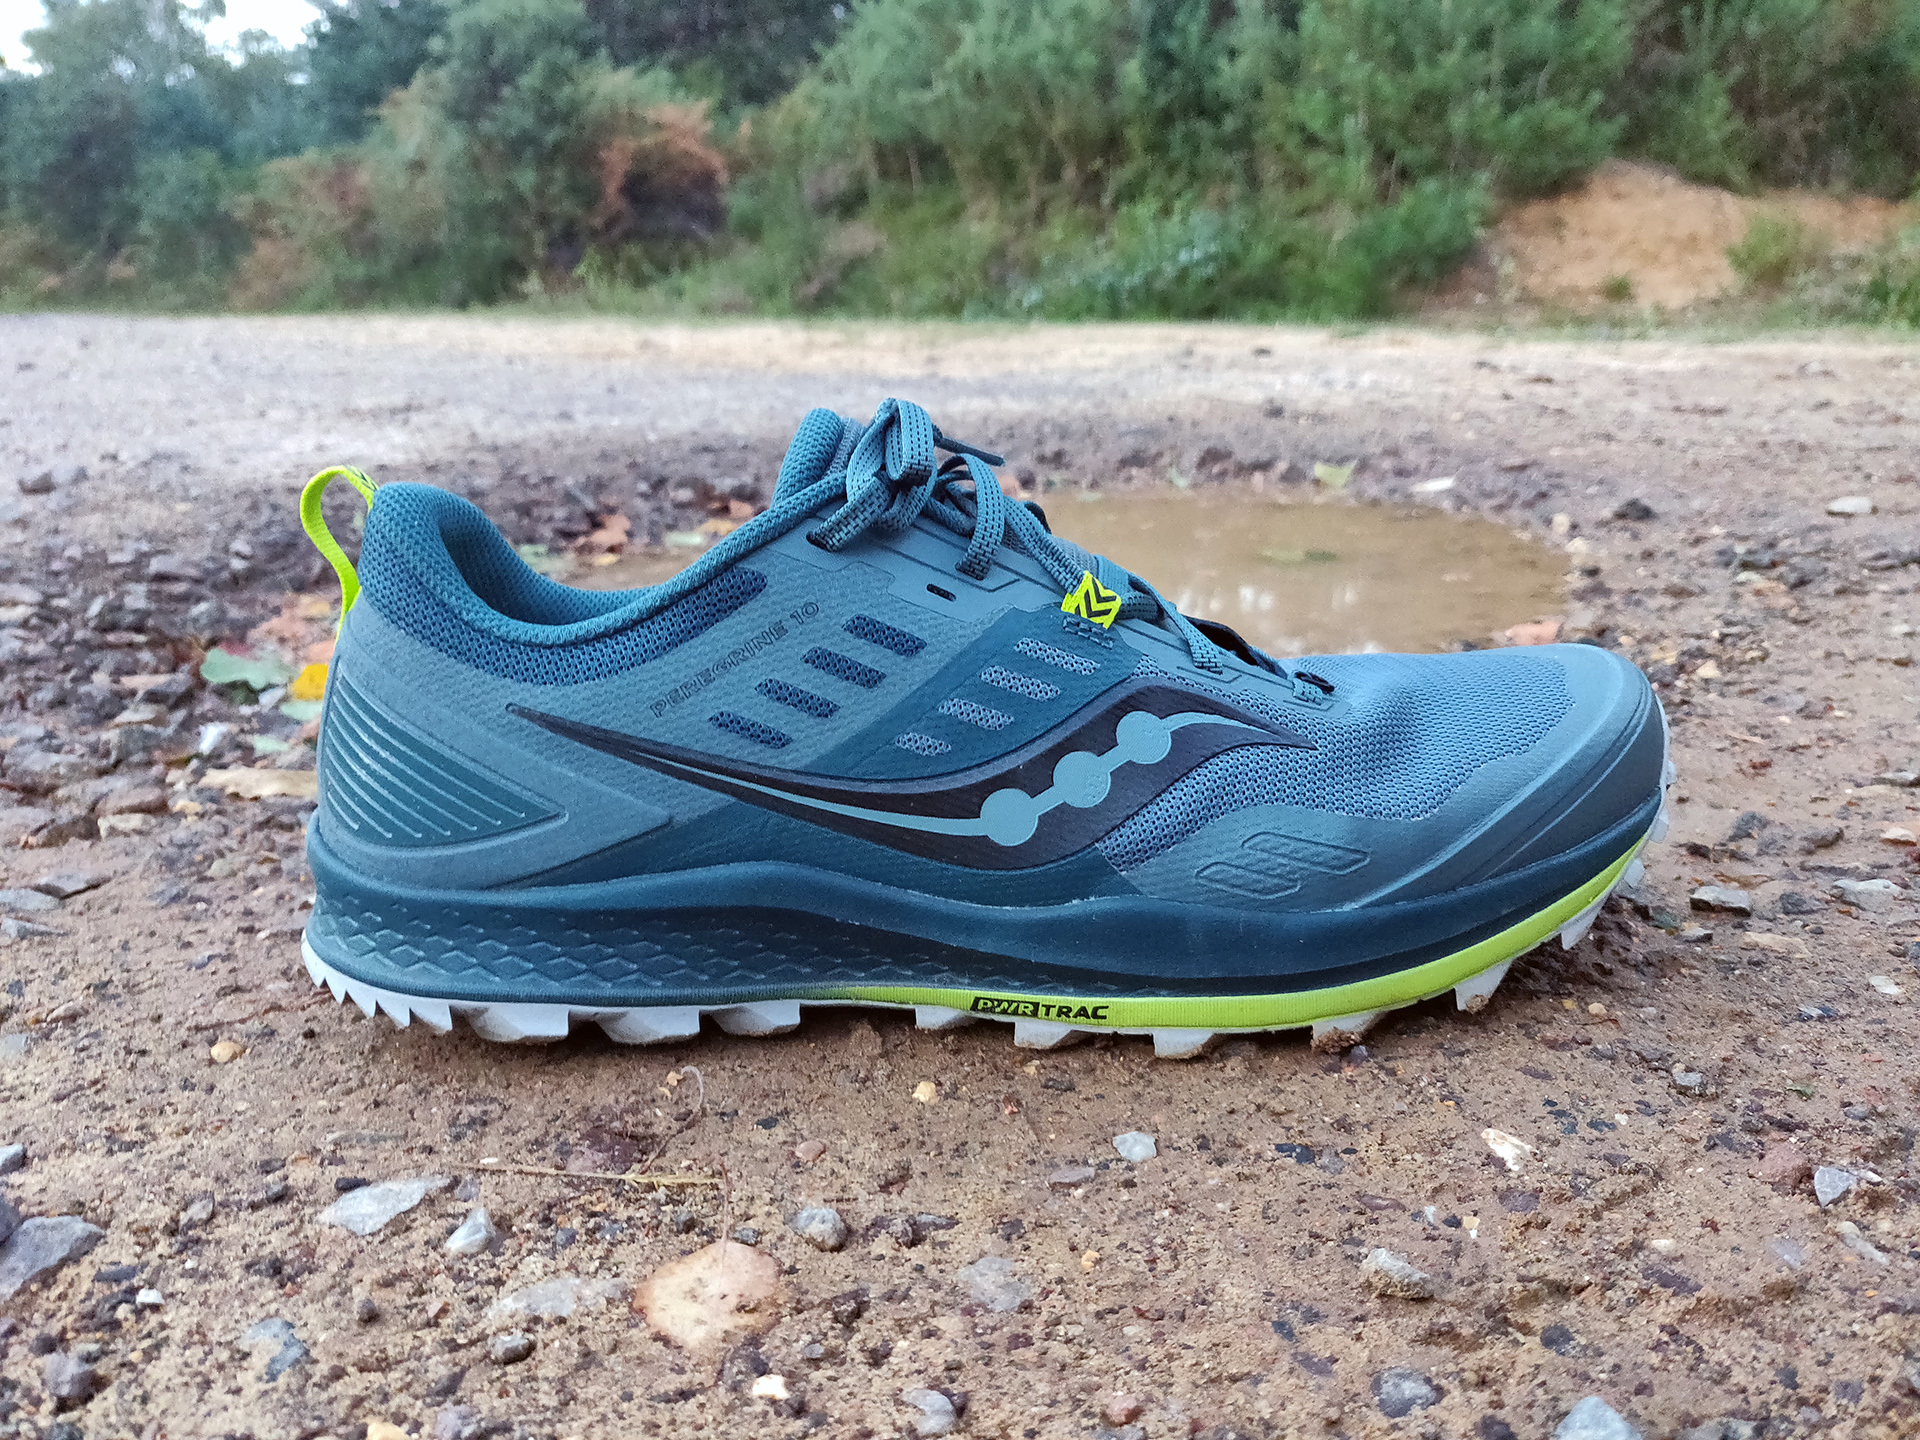 Saucony Peregrine 10 ST shoe on a gravel trail / road.